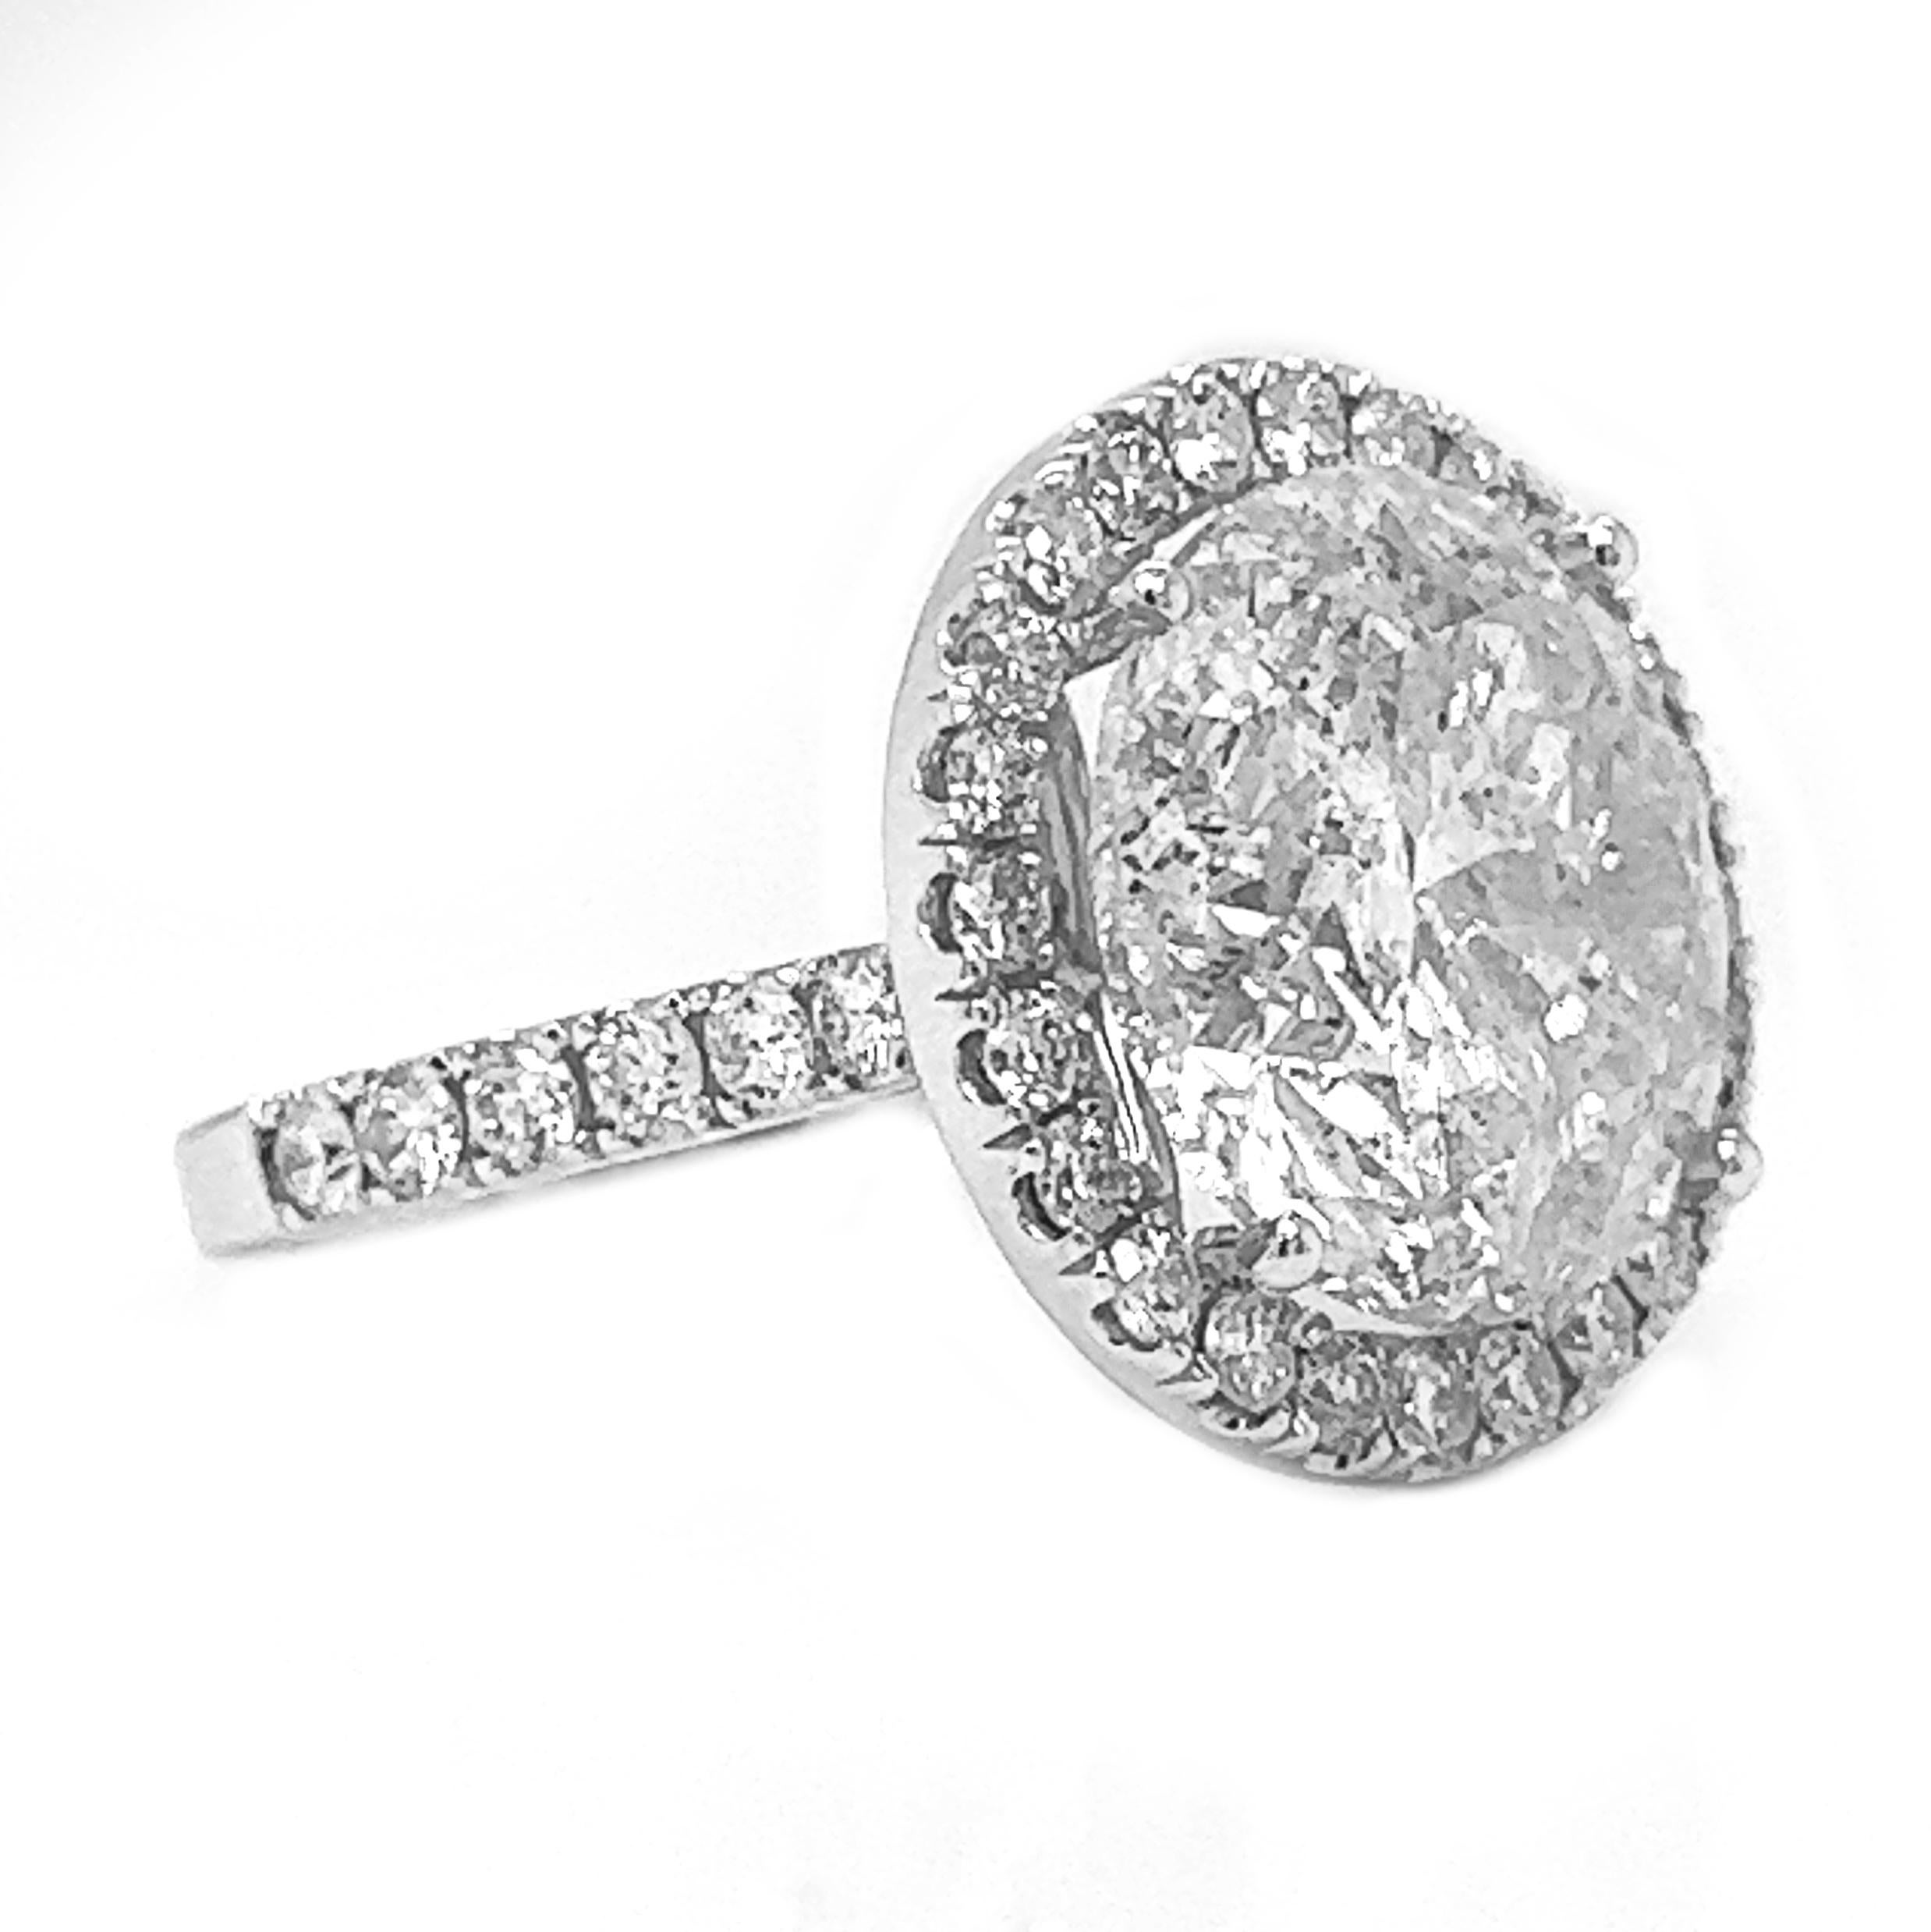 What makes this piece unique and special is its extraordinary 11-carat natural mined round diamond, which takes center stage in a captivating halo setting. This diamond is a true marvel of nature, exhibiting exceptional brilliance and sparkle. Its